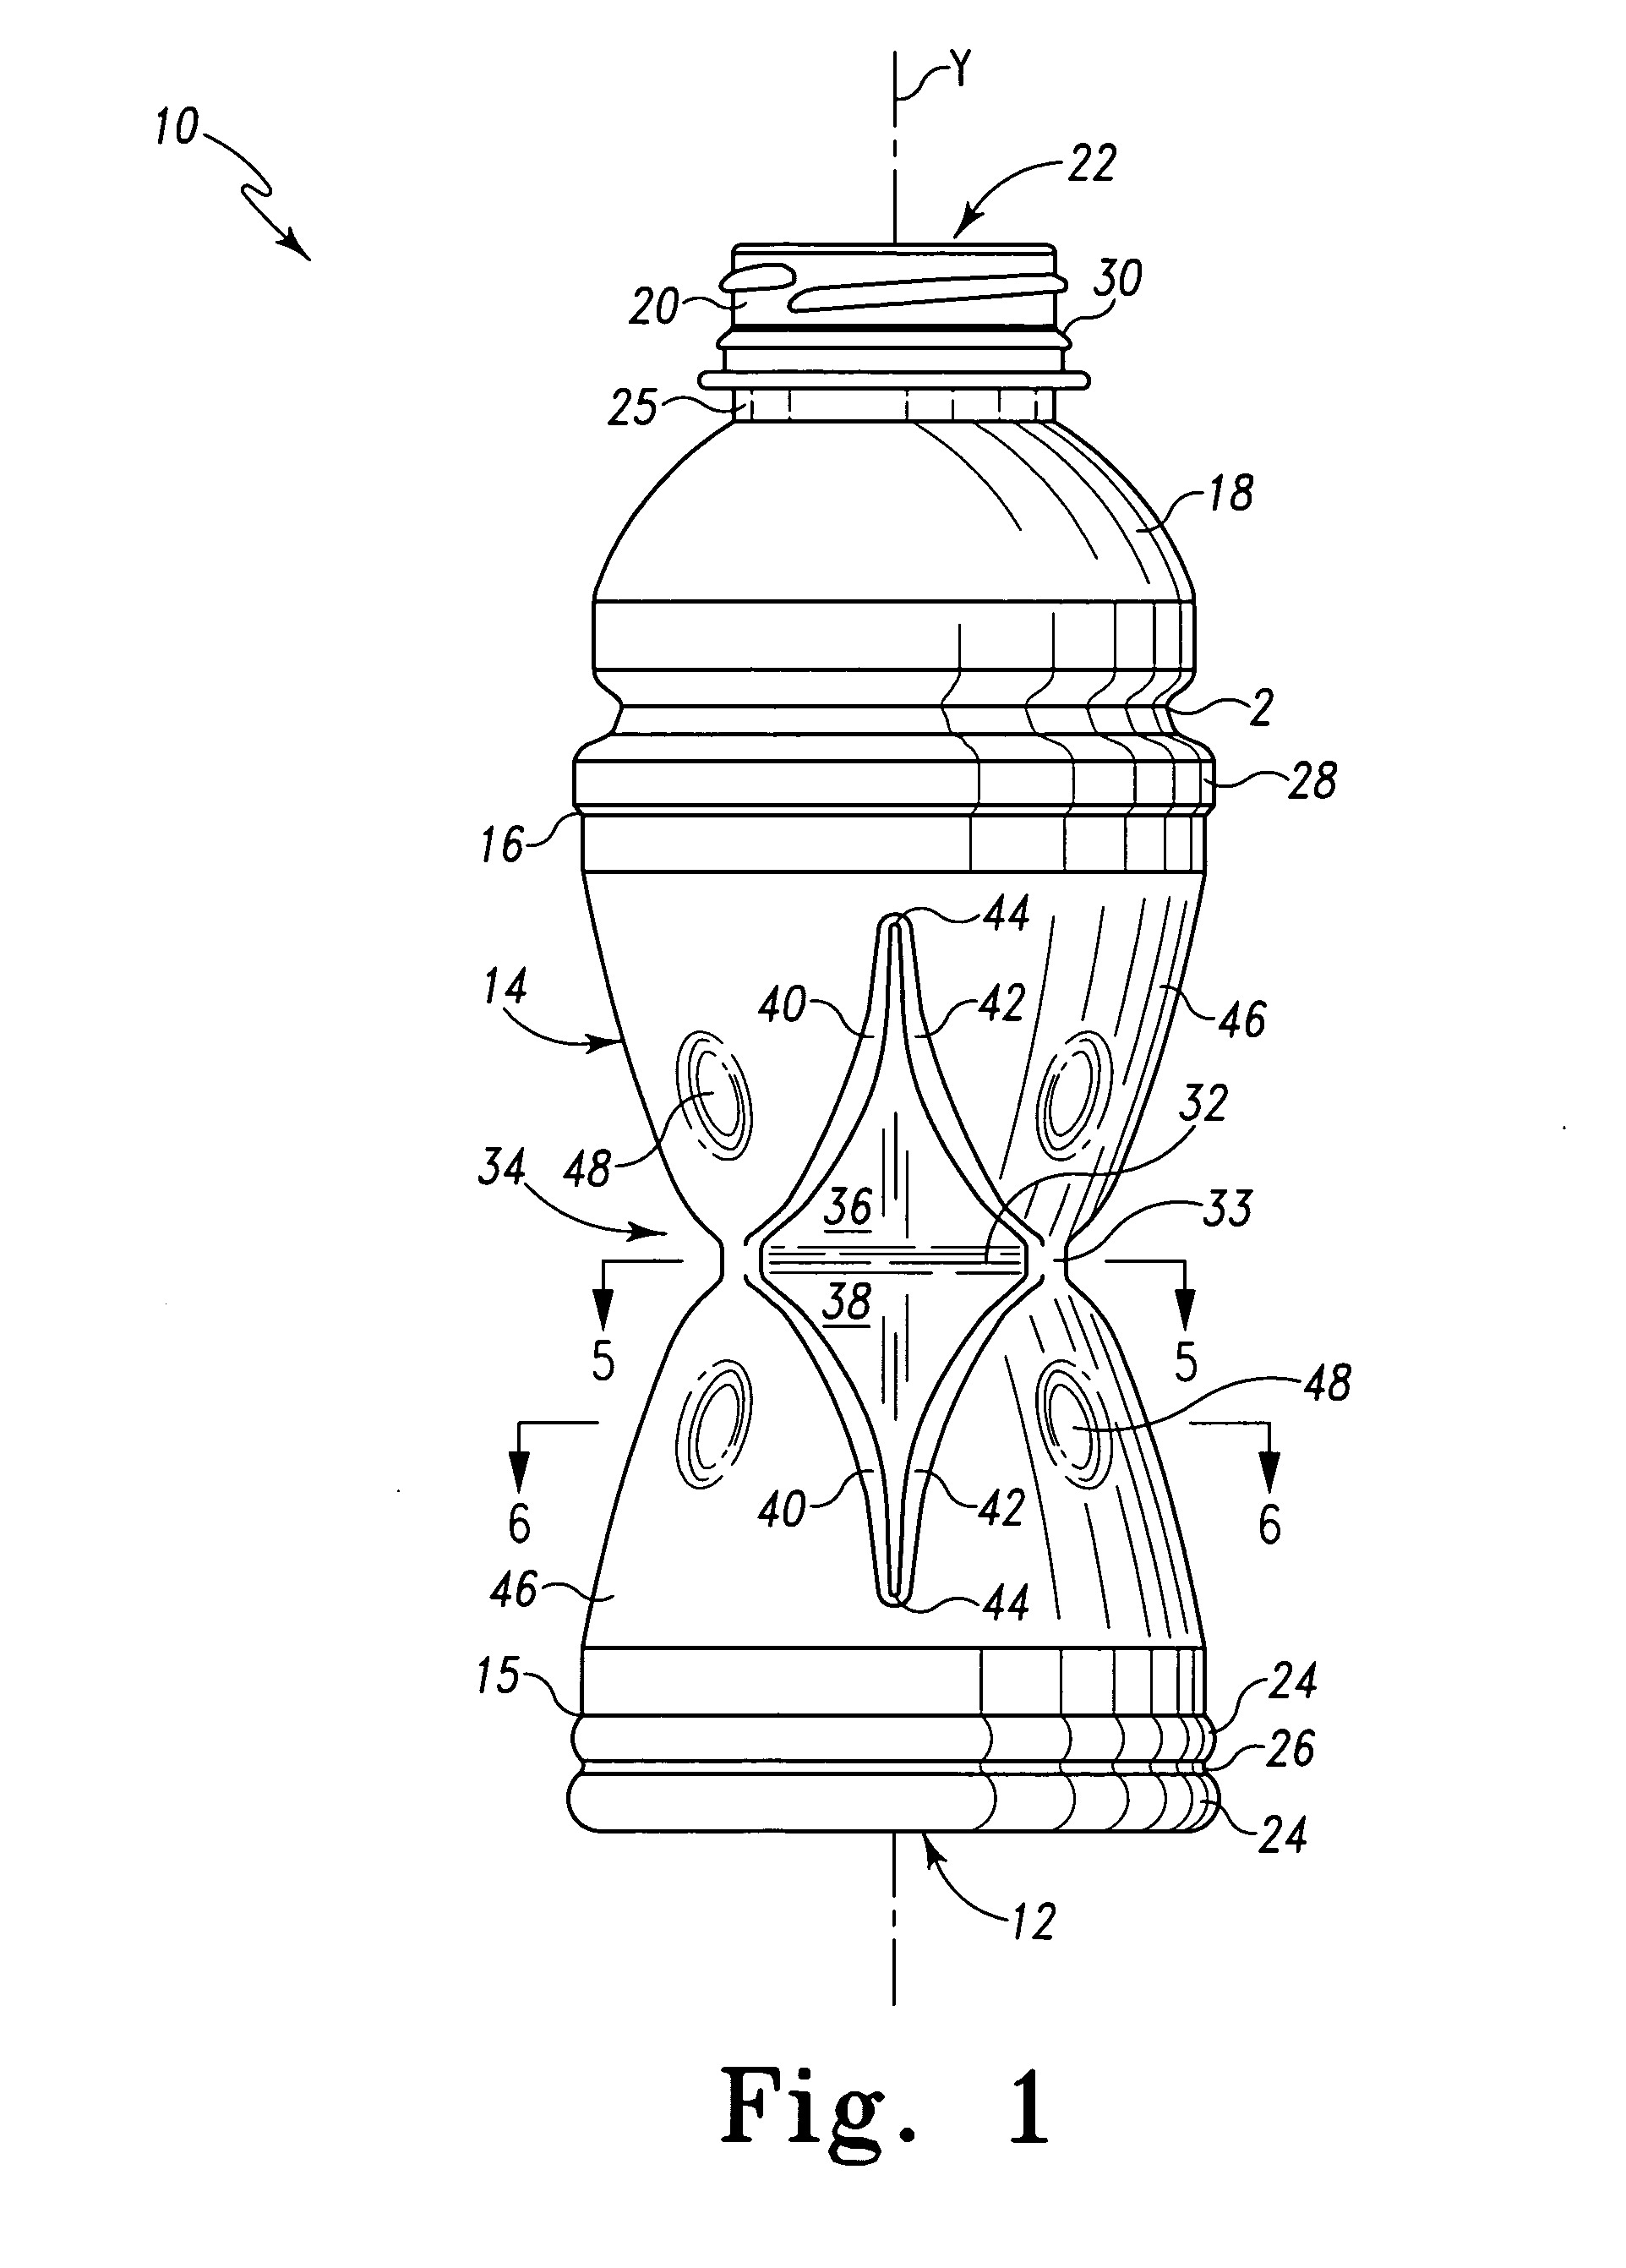 Round hour-glass hot-fillable bottle